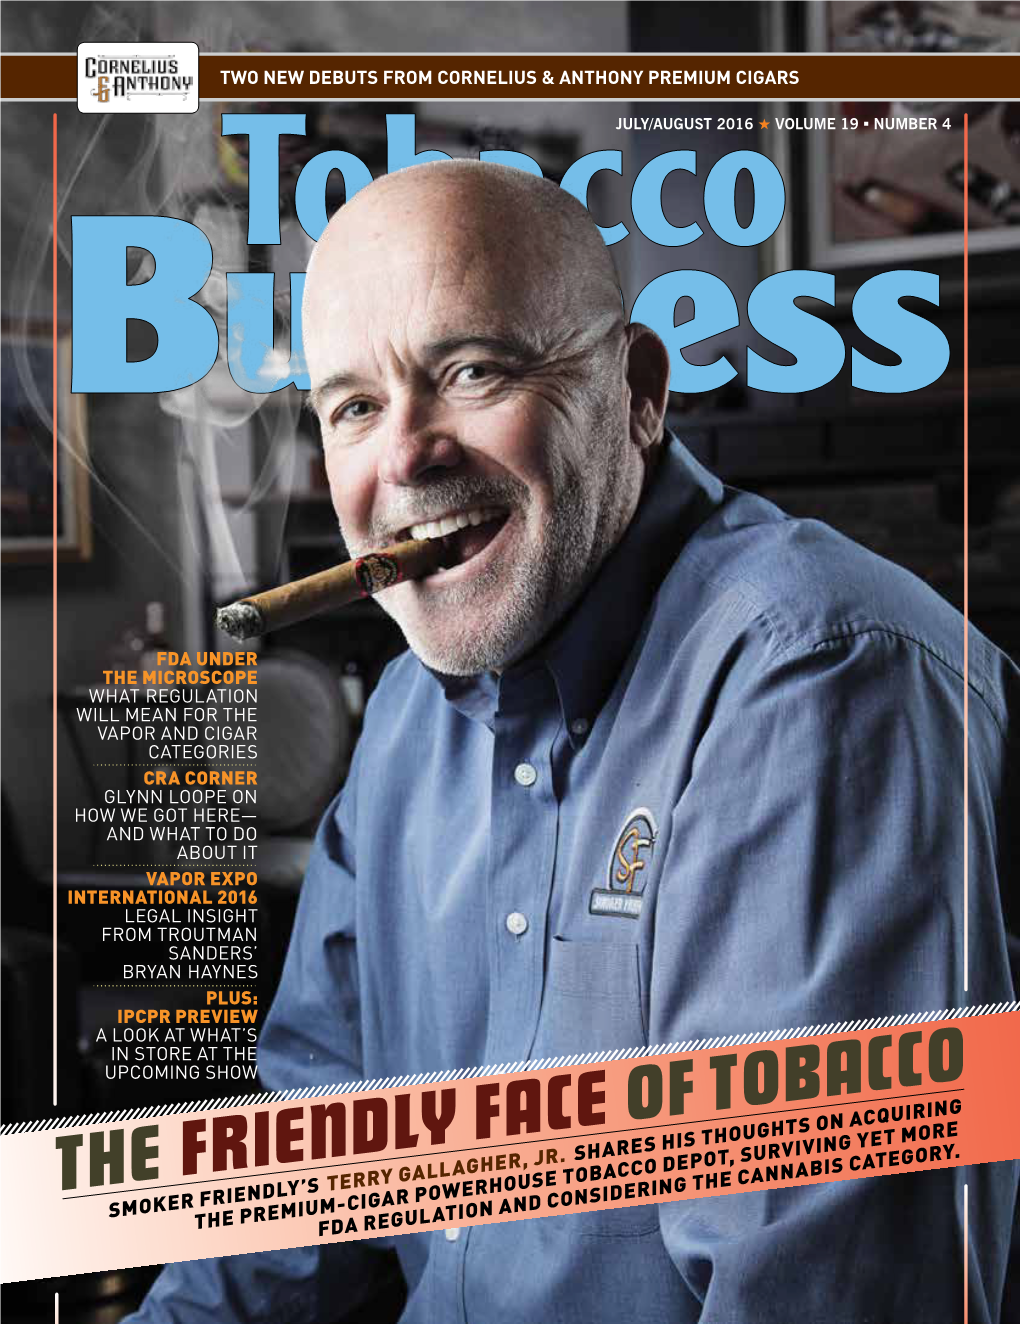 The Friendly Face of Tobacco